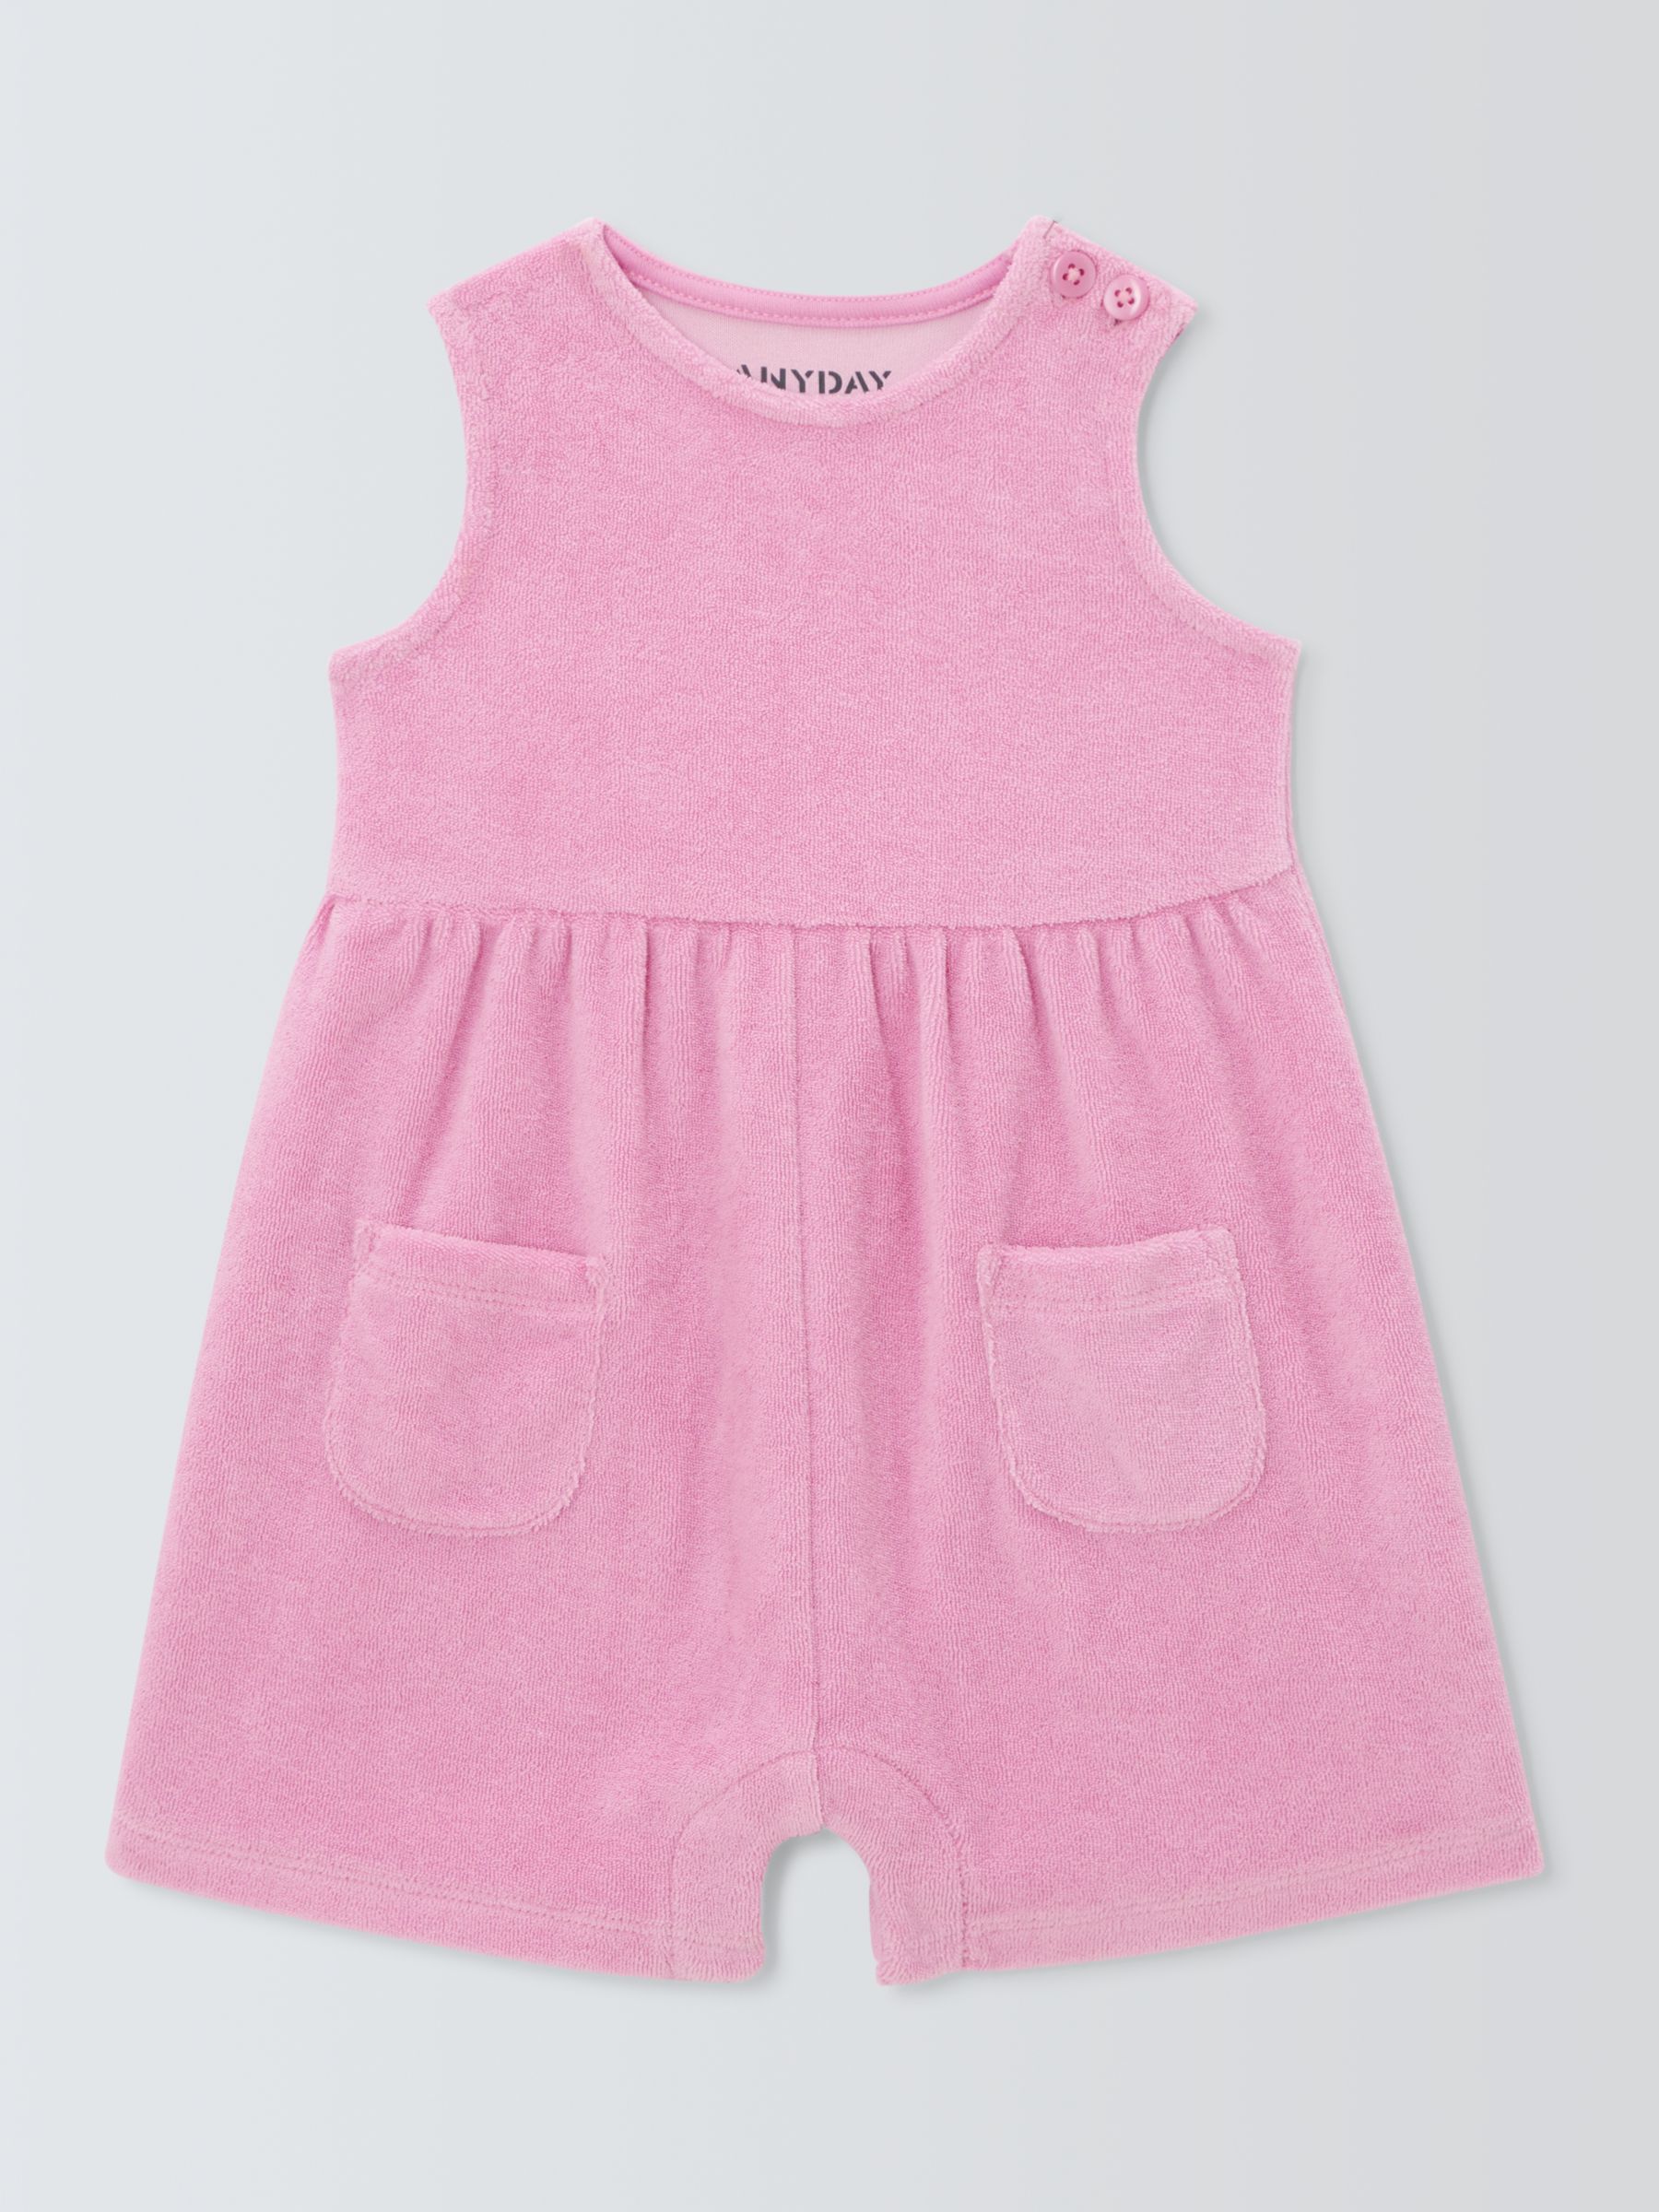 Buy John Lewis ANYDAY Baby Towelling Playsuit, Pink Online at johnlewis.com